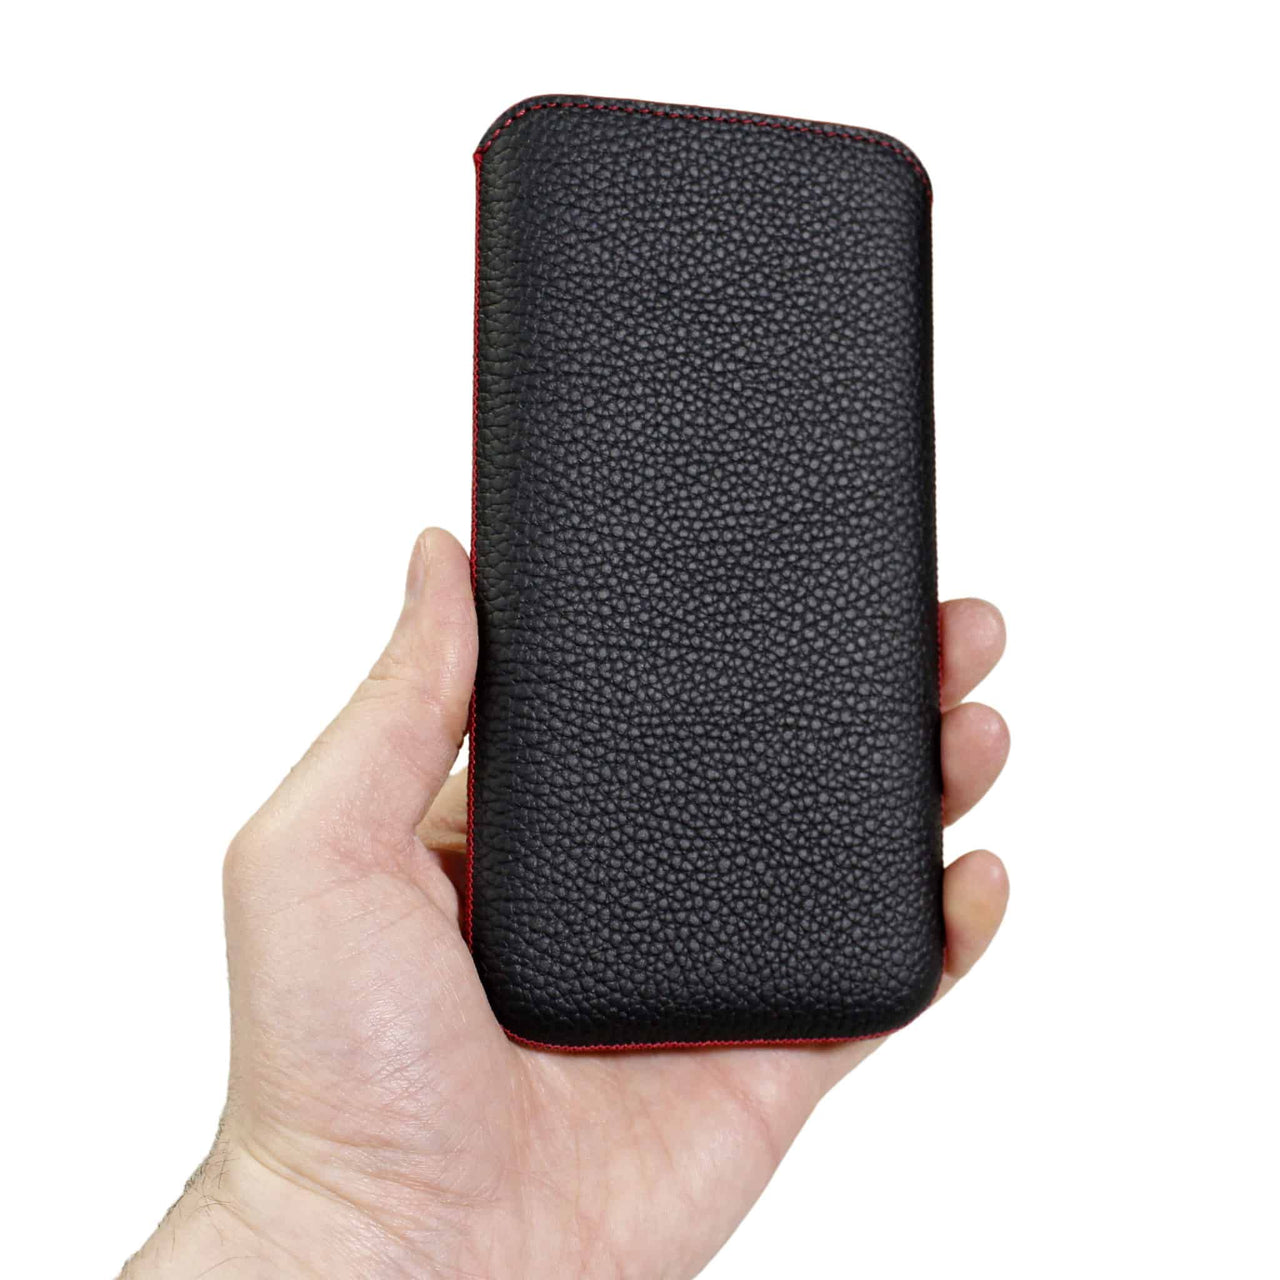 iPhone XR Genuine Leather Pouch Sleeve Case | Artisanpouch